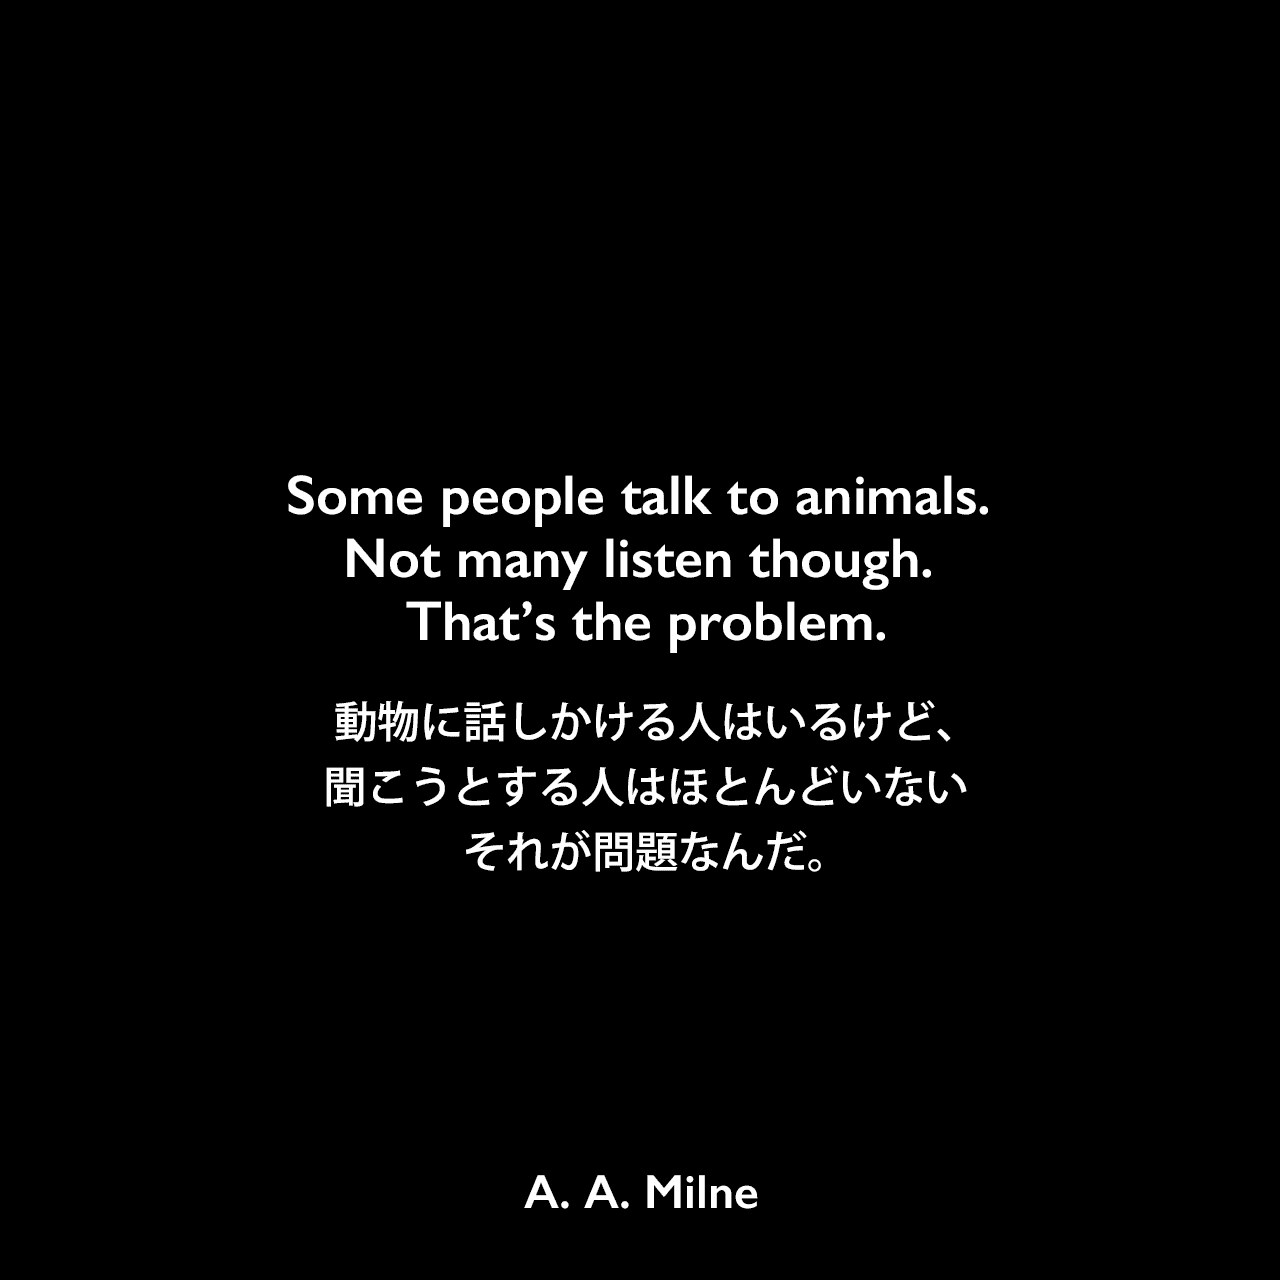 Some people talk to animals. Not many listen though. That’s the problem.動物に話しかける人はいるけど、聞こうとする人はほとんどいない それが問題なんだ。A. A. Milne